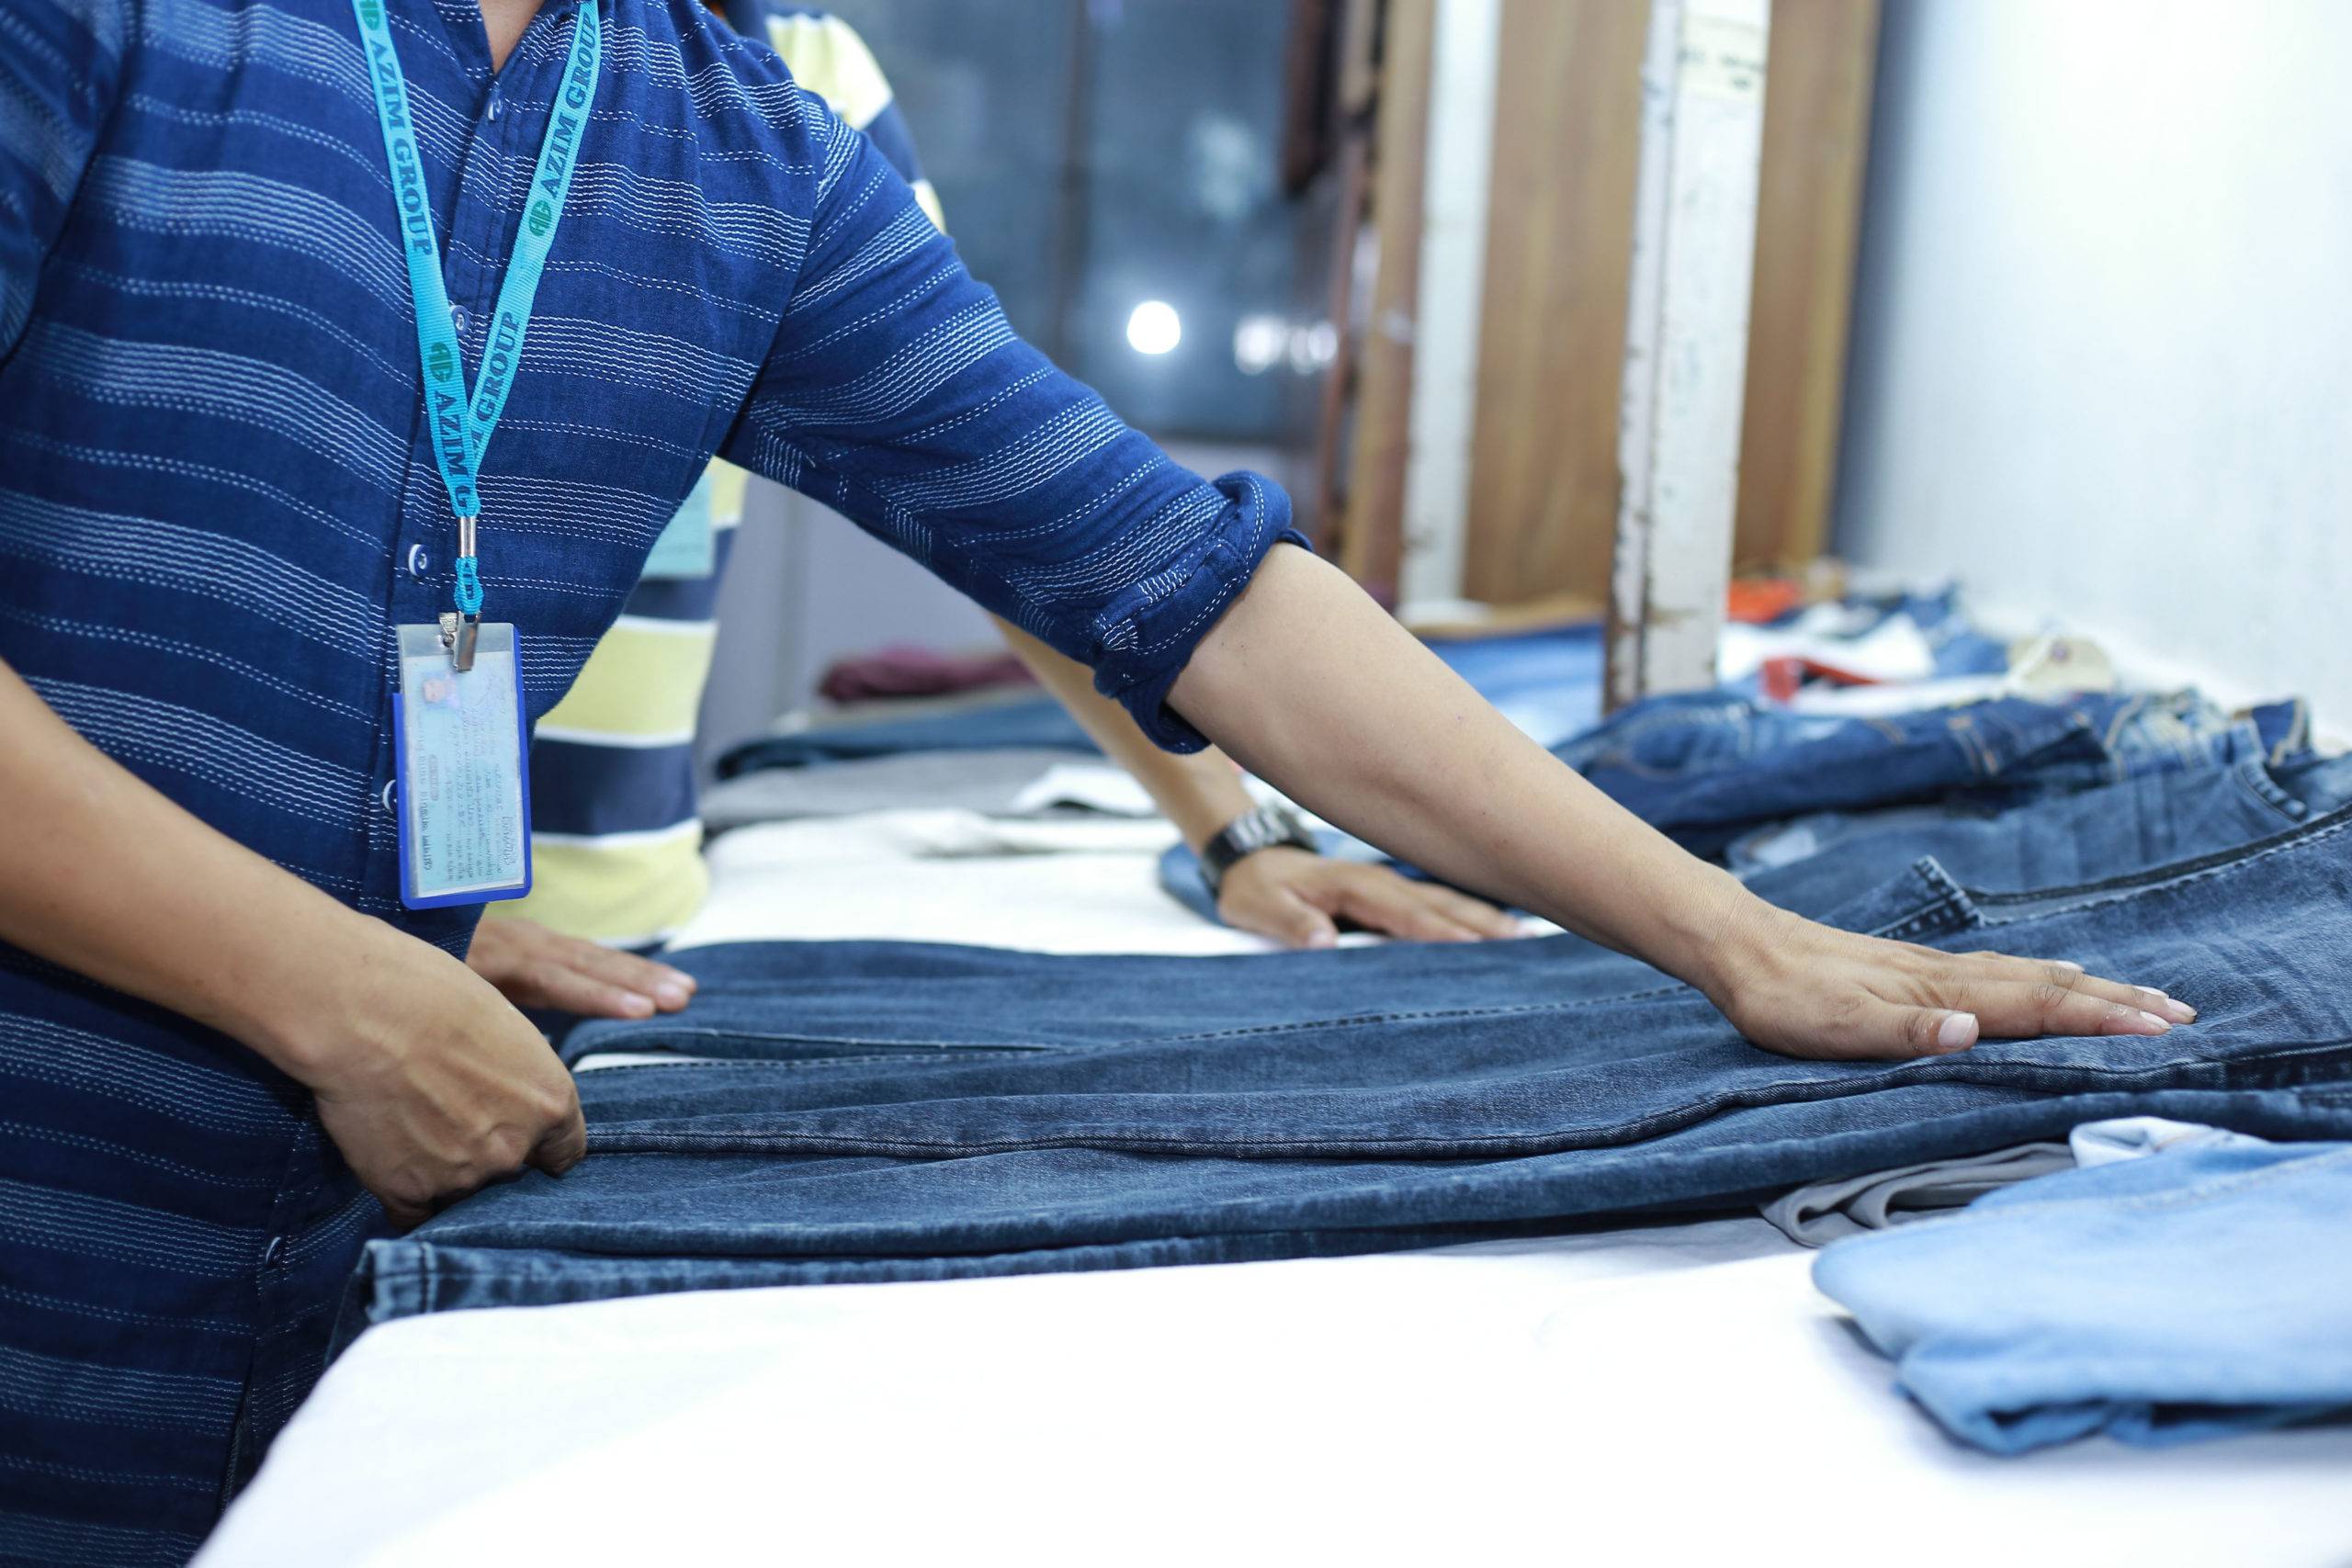 Garment inspection in a garment factory in Bangladesh